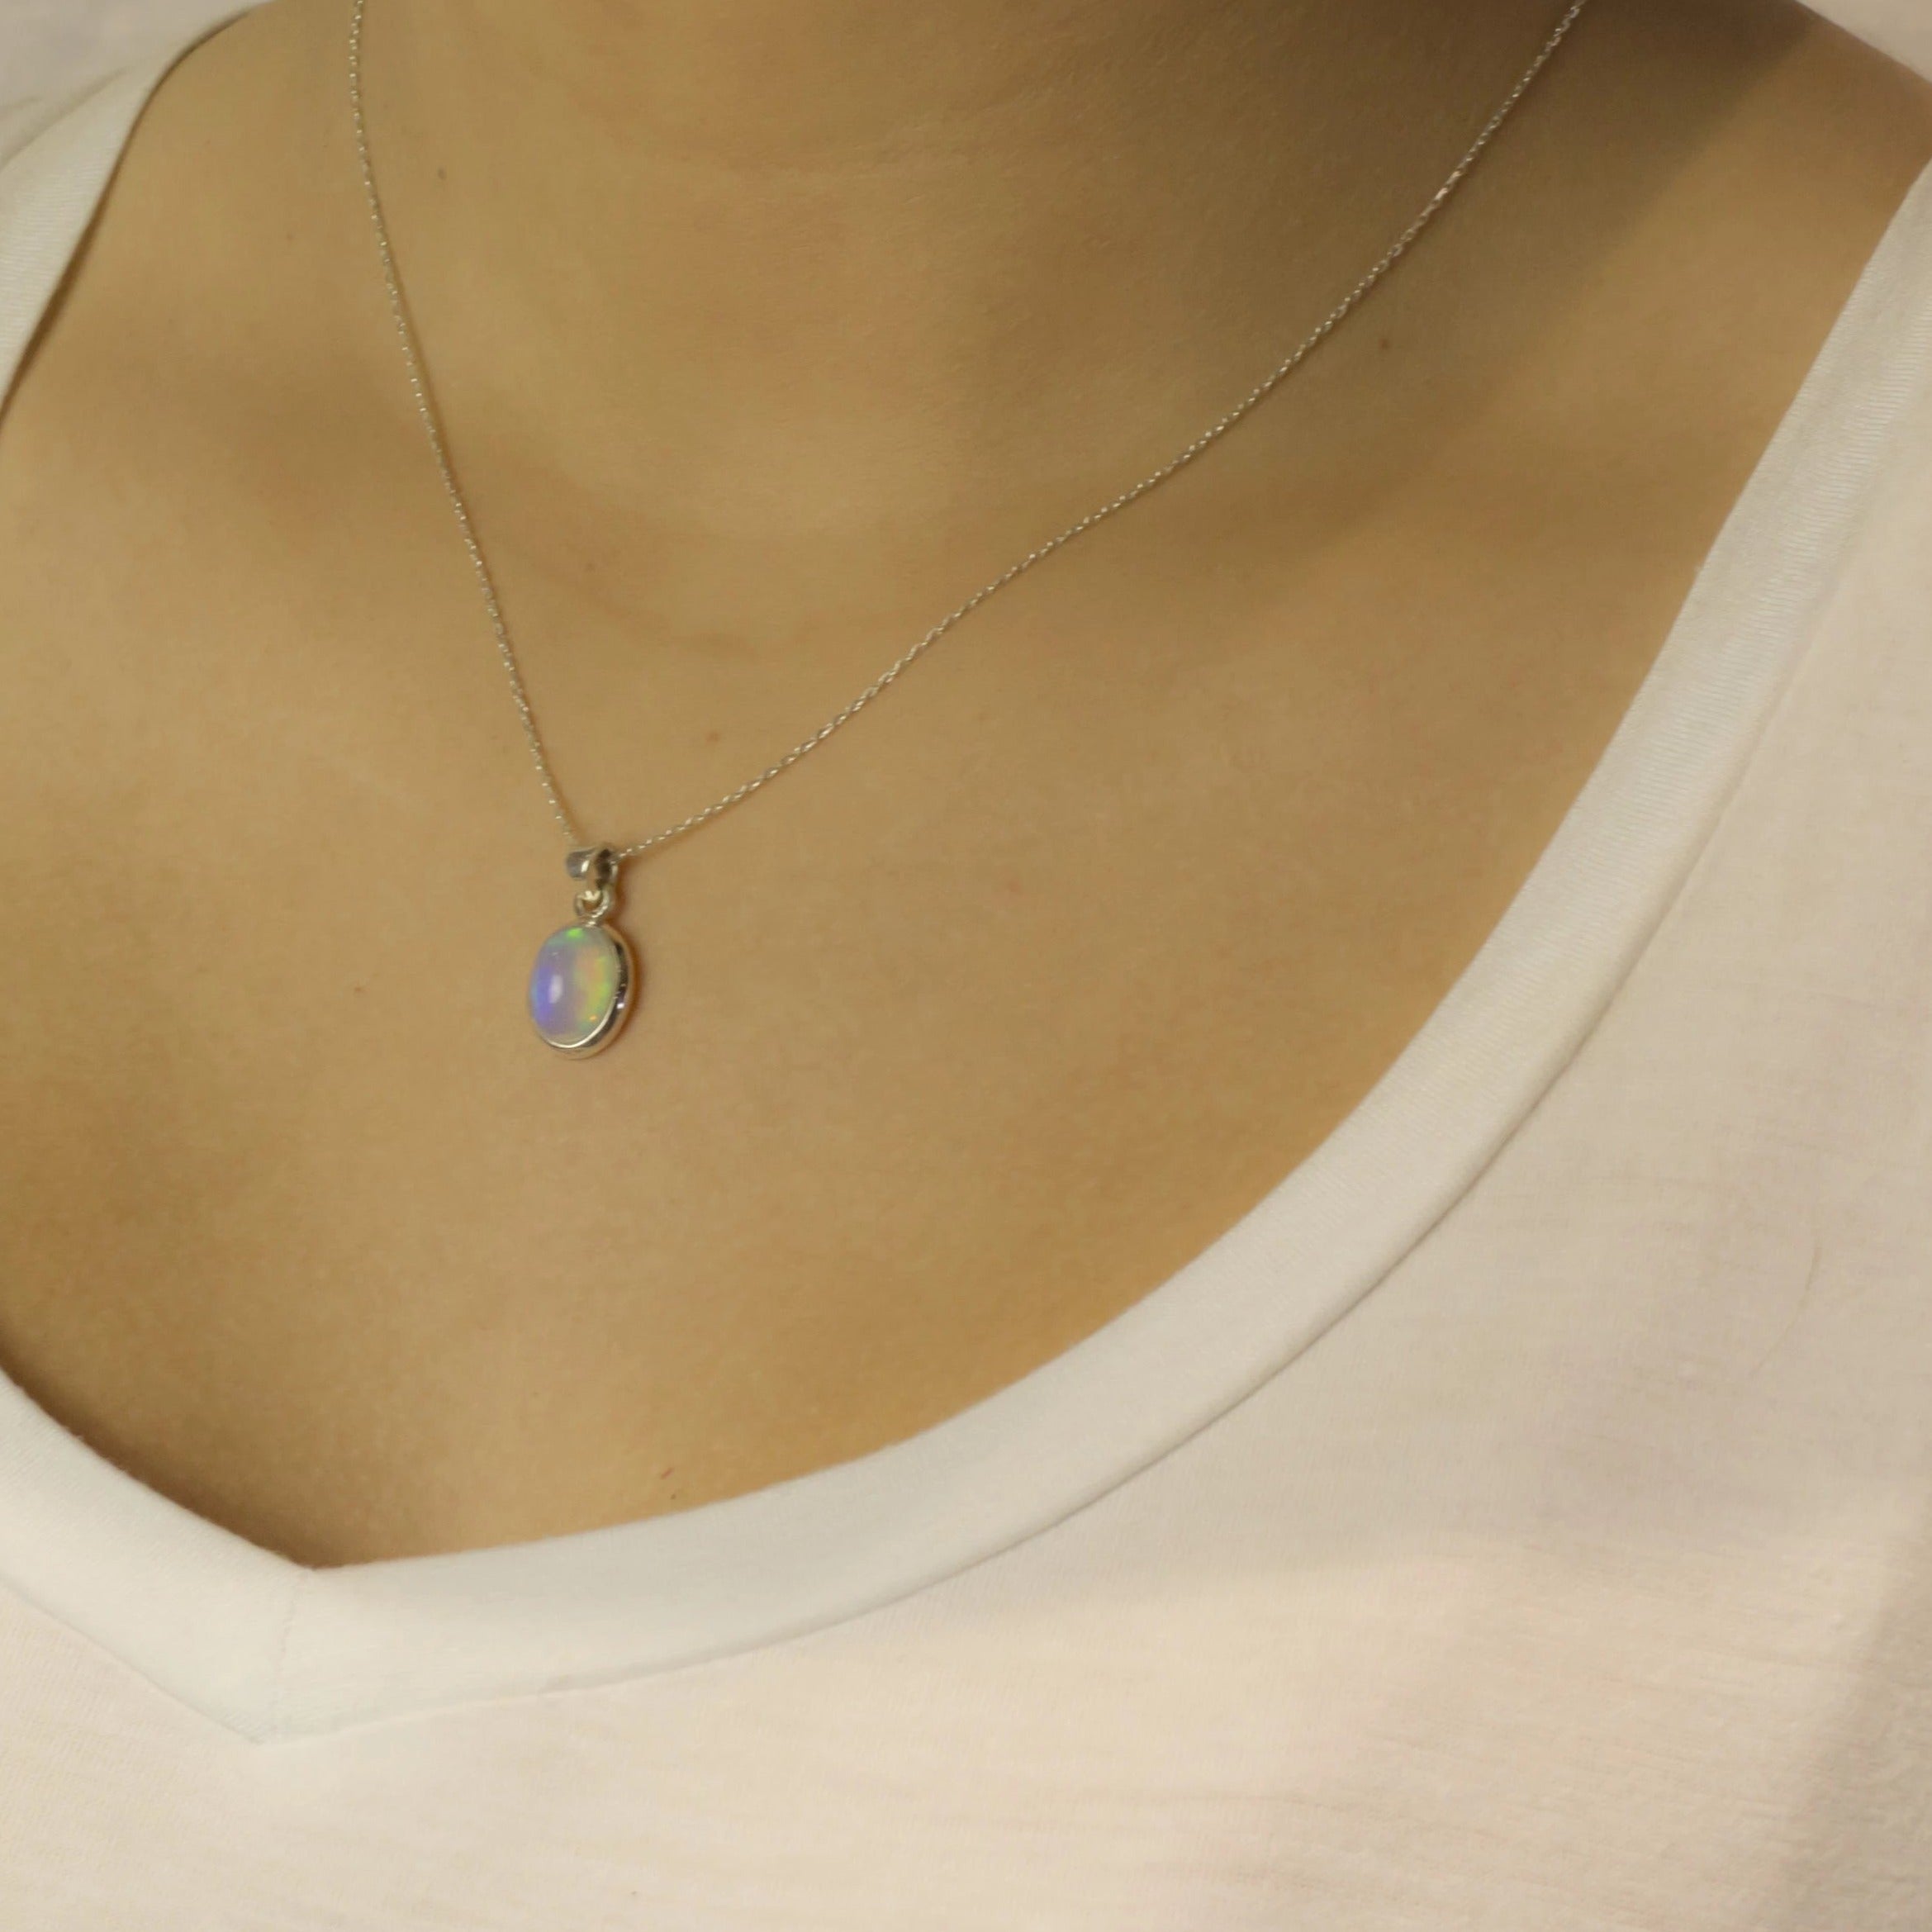 Cabochon oval Precious Opal necklace on Model